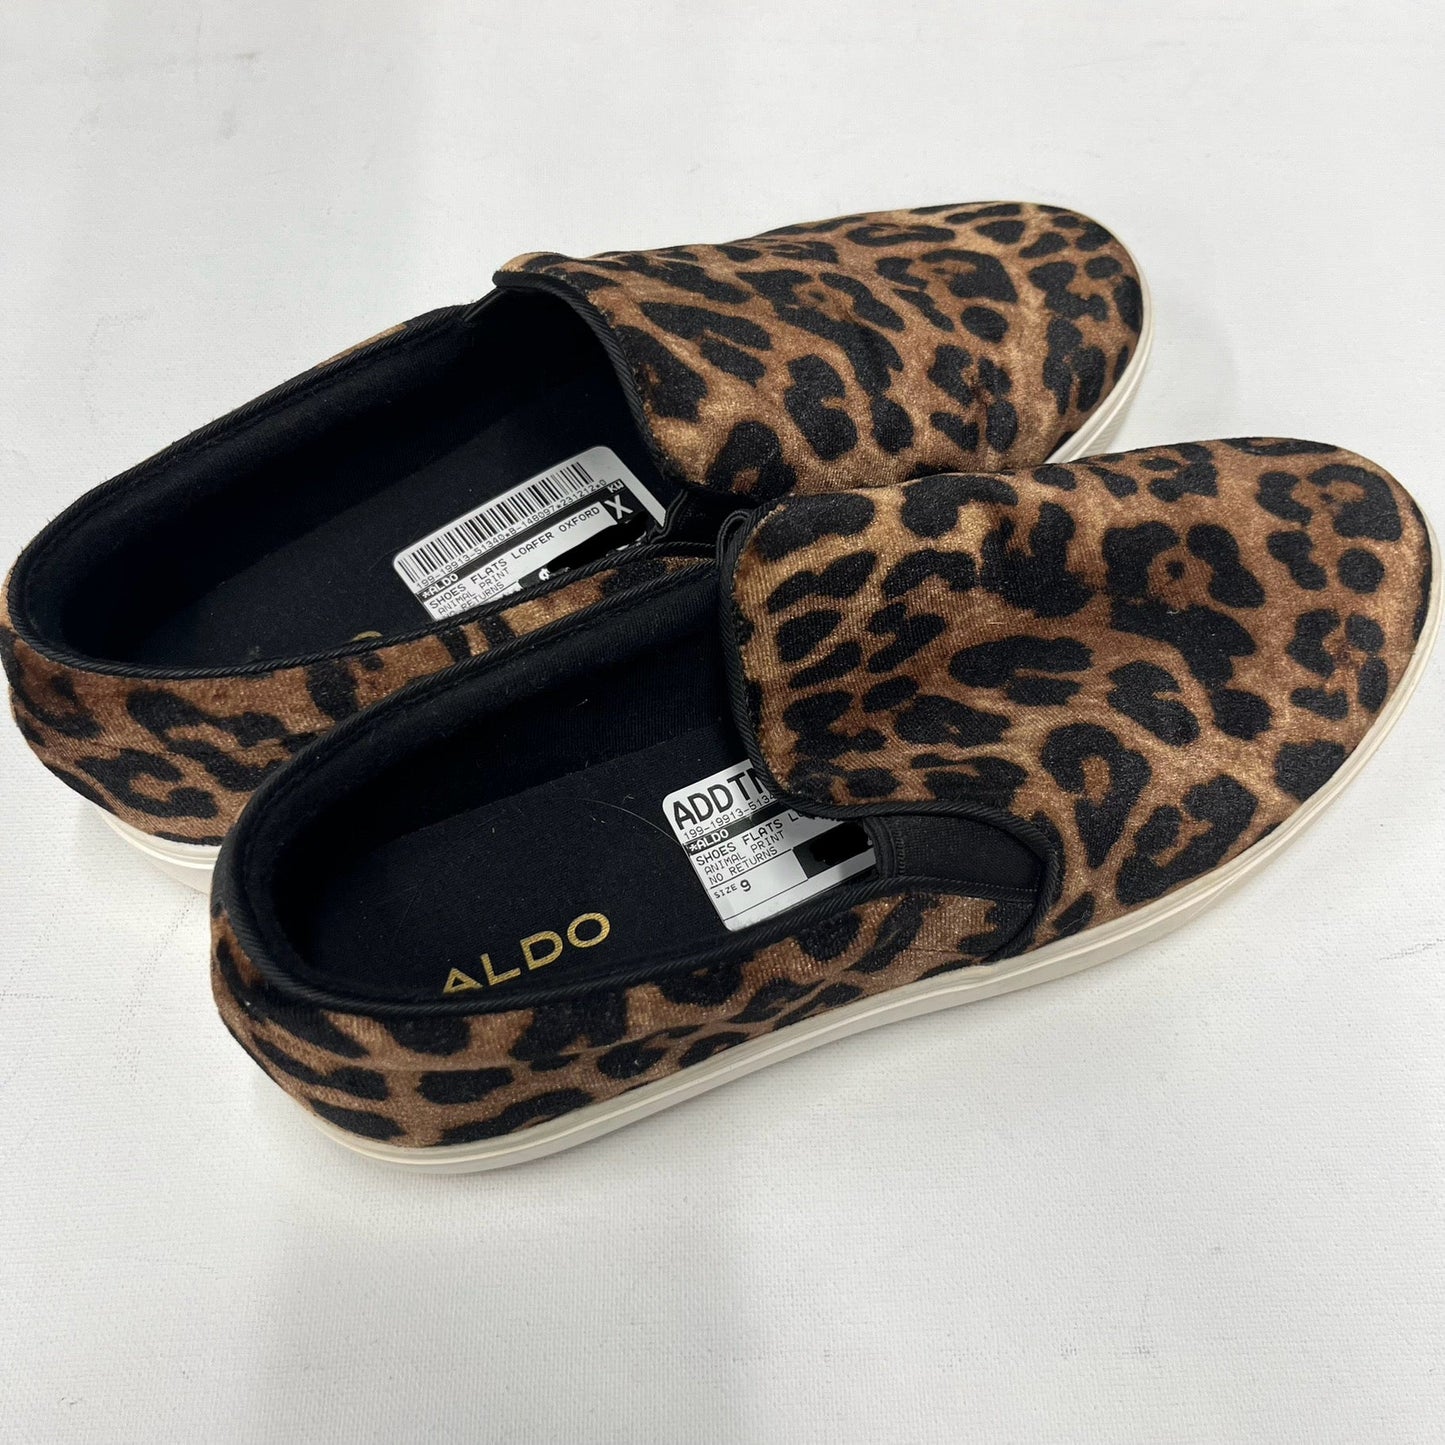 Shoes Flats Loafer Oxford By Aldo  Size: 9